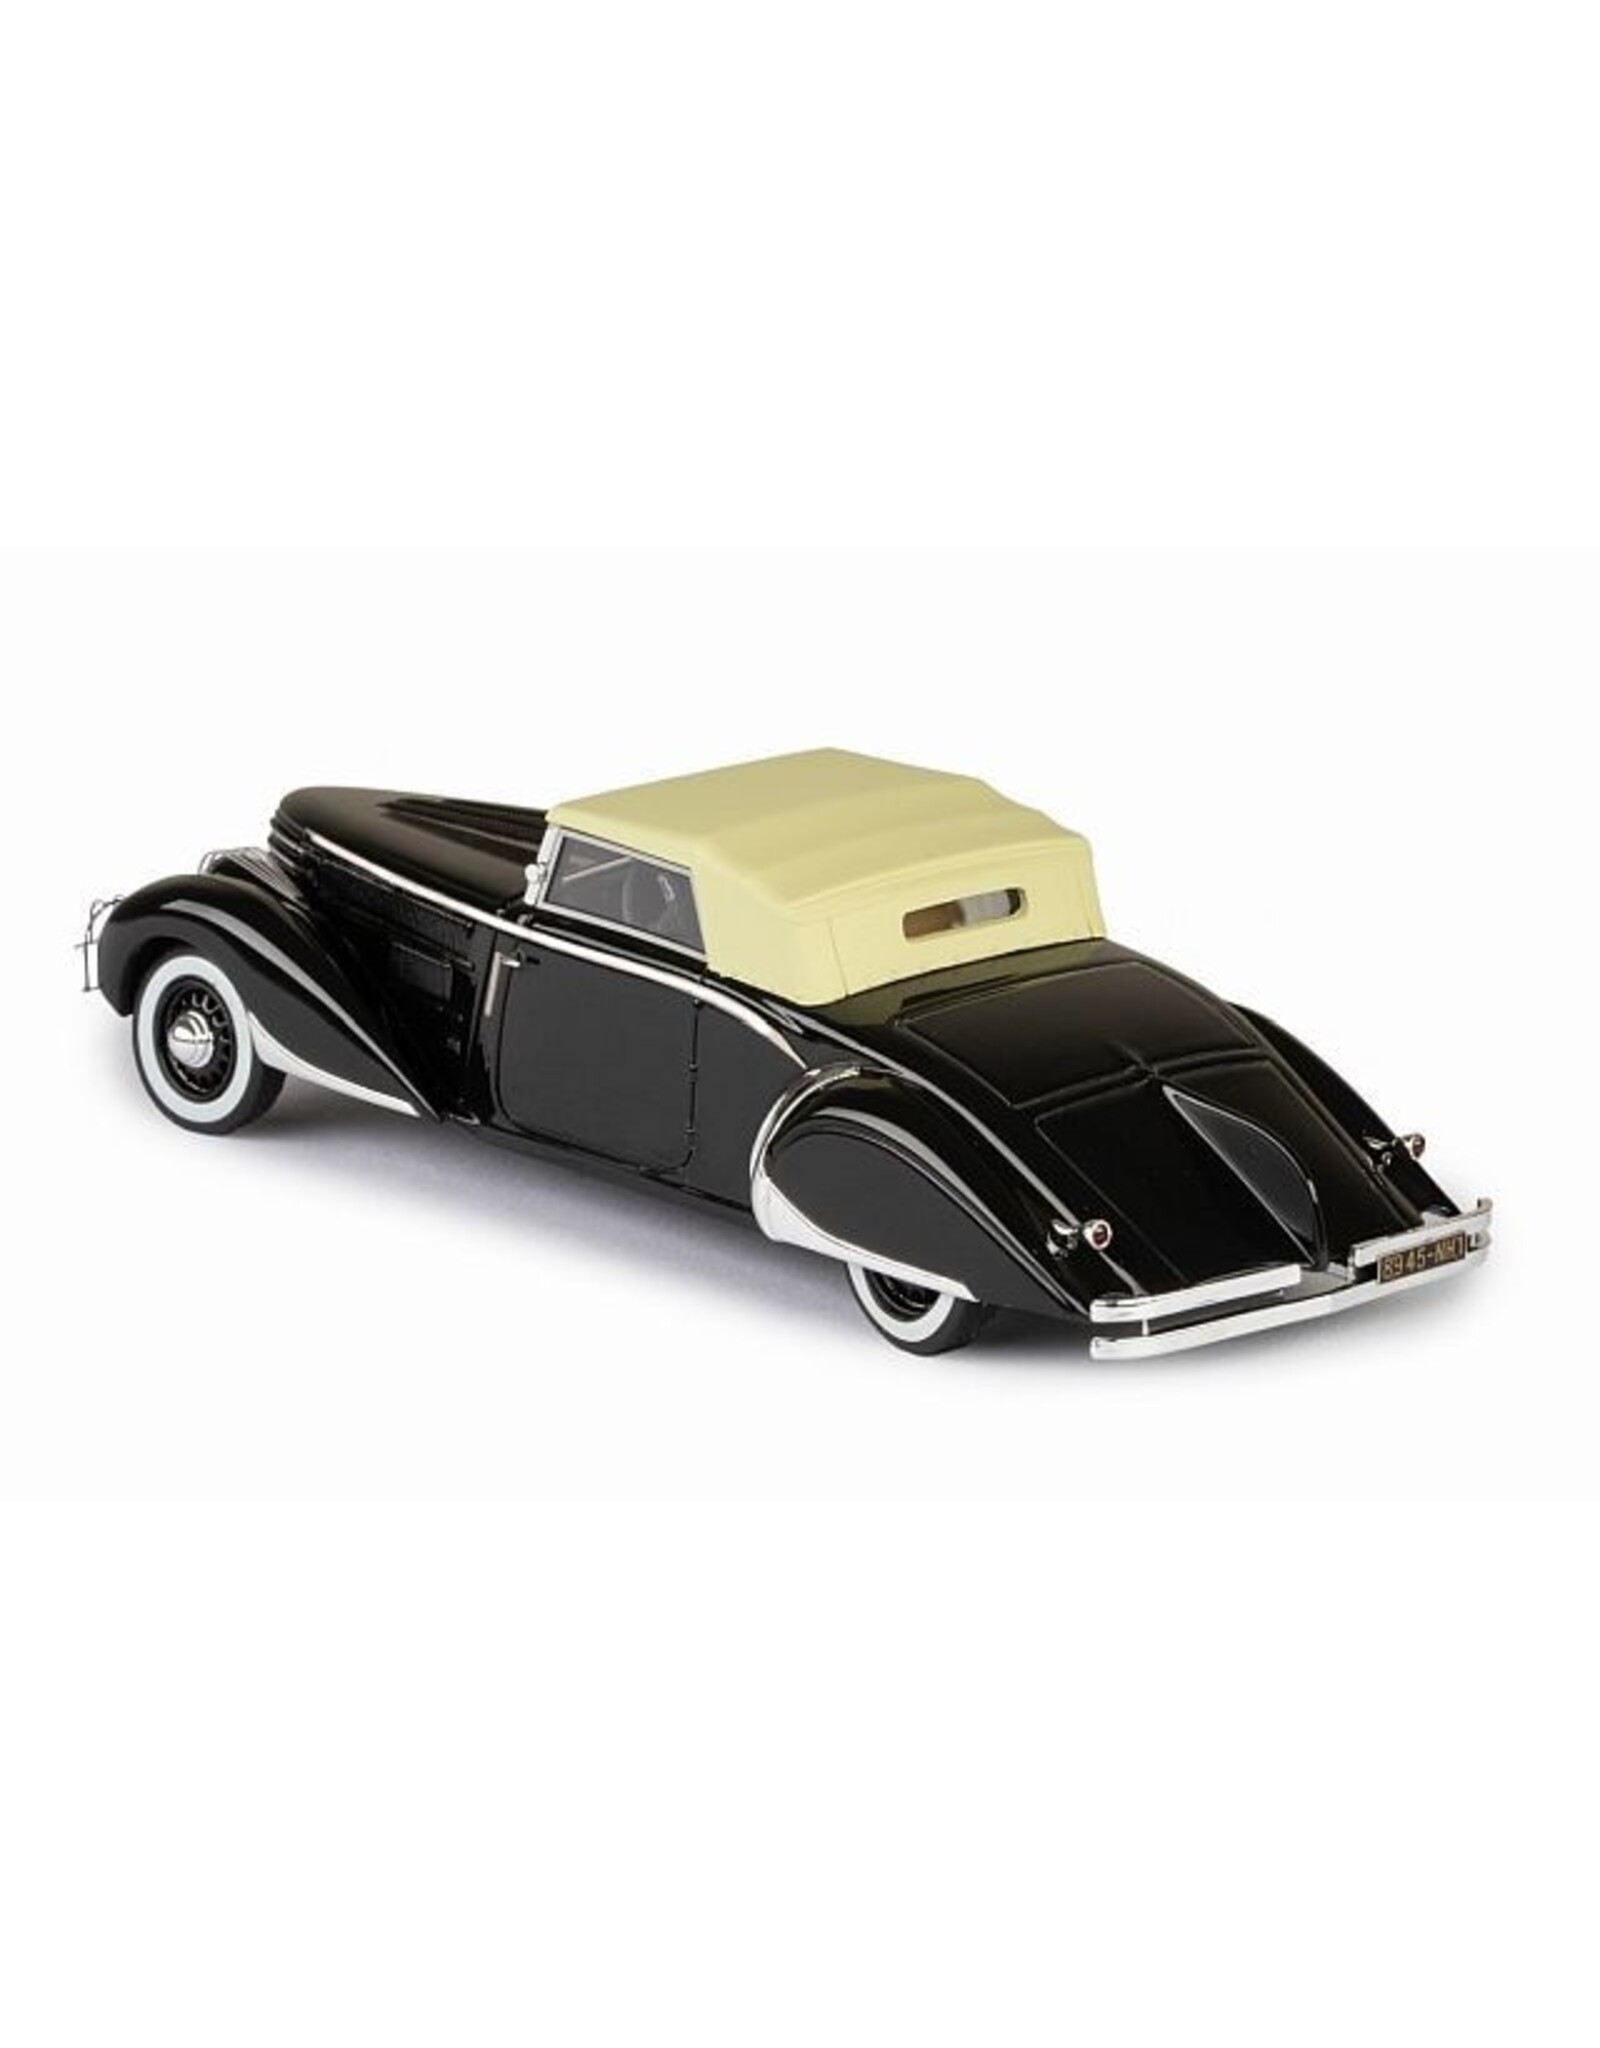 Delage by Chapron Delage D-8-85 Clabot by Henri Chapron(1935)closed roof(with back bumper)black